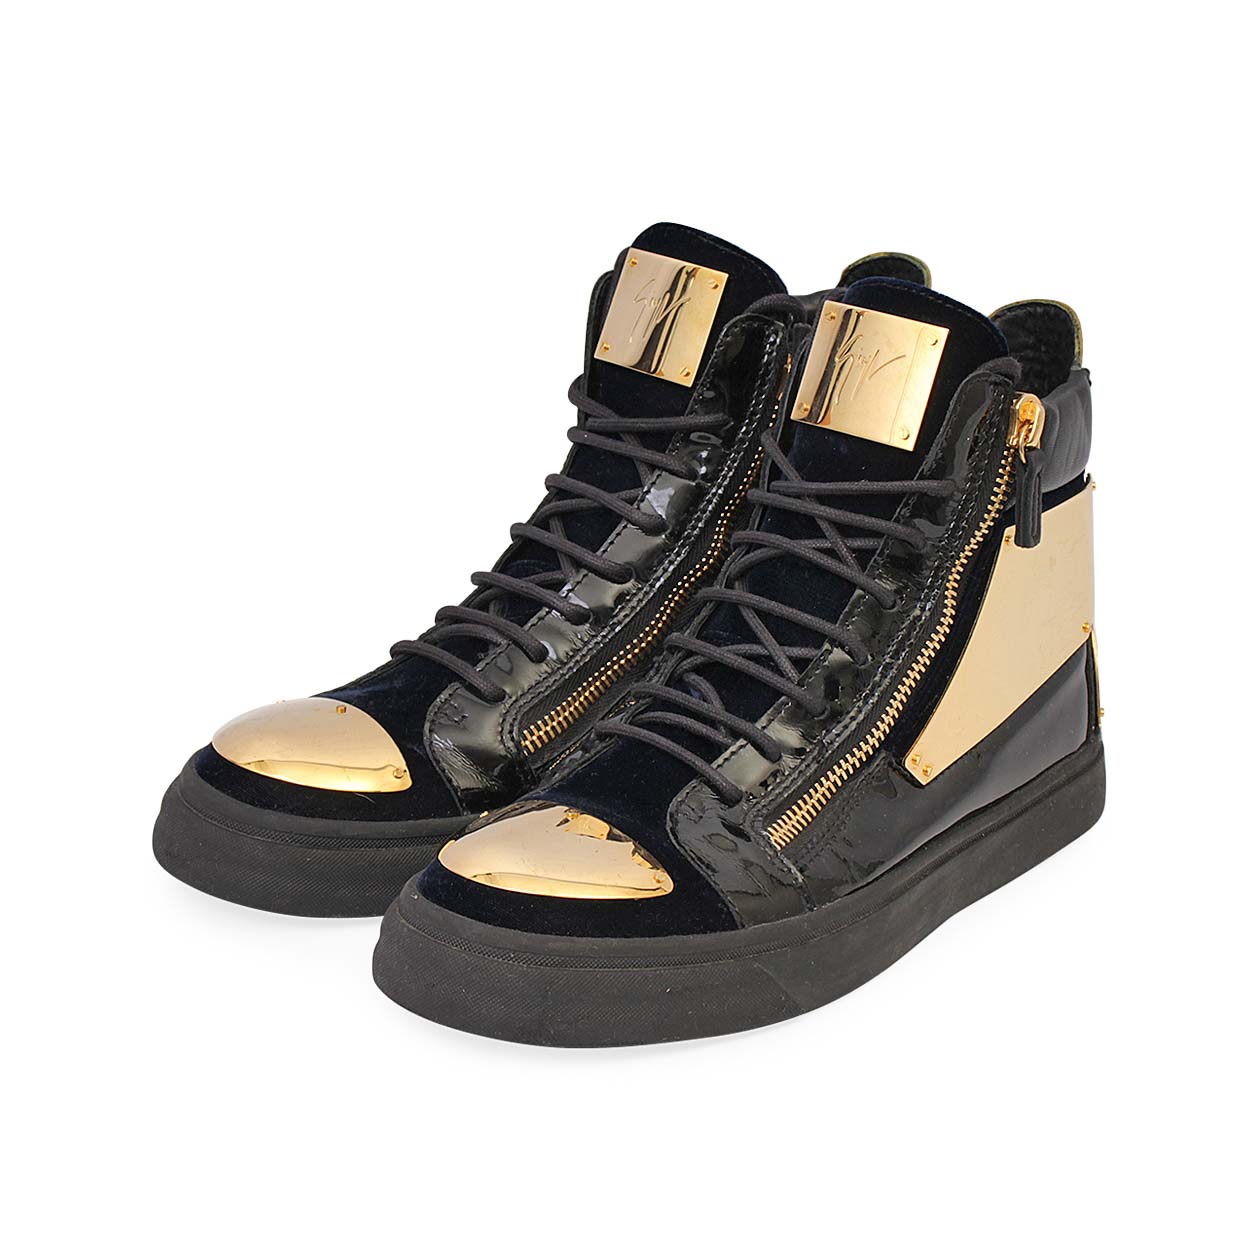 GIUSEPPE ZANOTTI Leather/Suede Gold Plate Sneakers Black/Gold - S: 41.5 ...